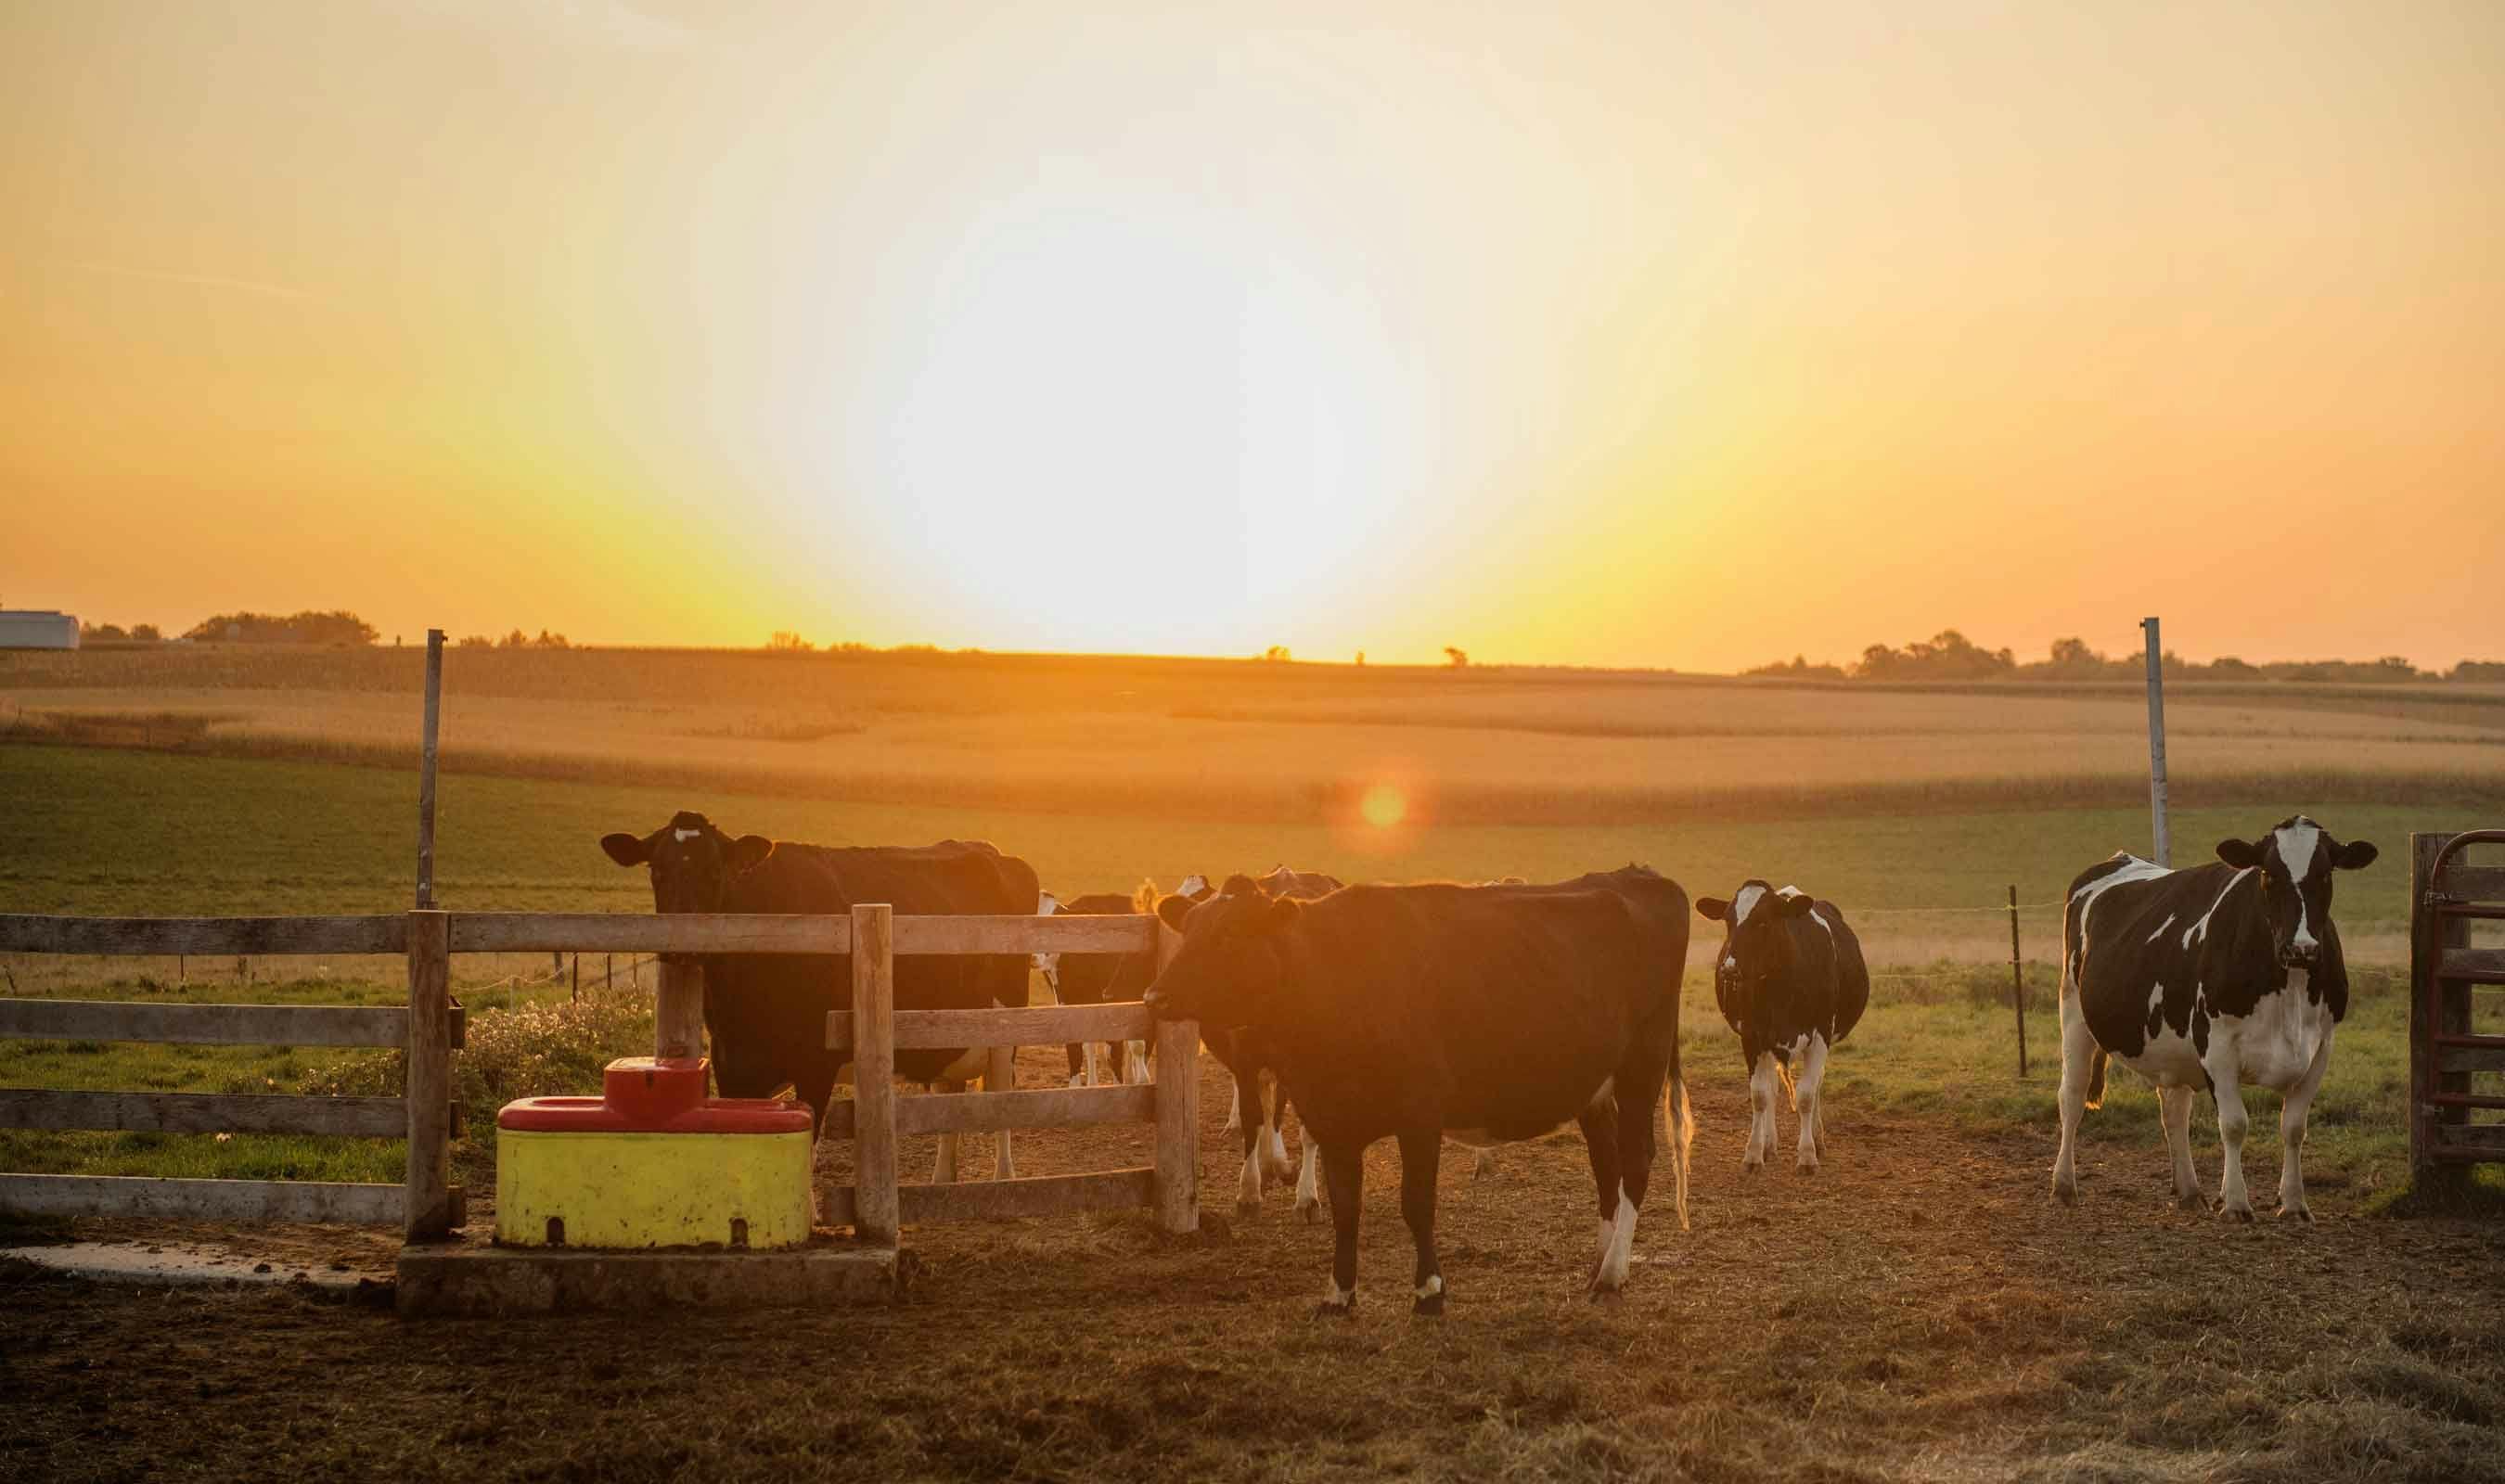 Cows standing in the barnyard with the sunset in the background.